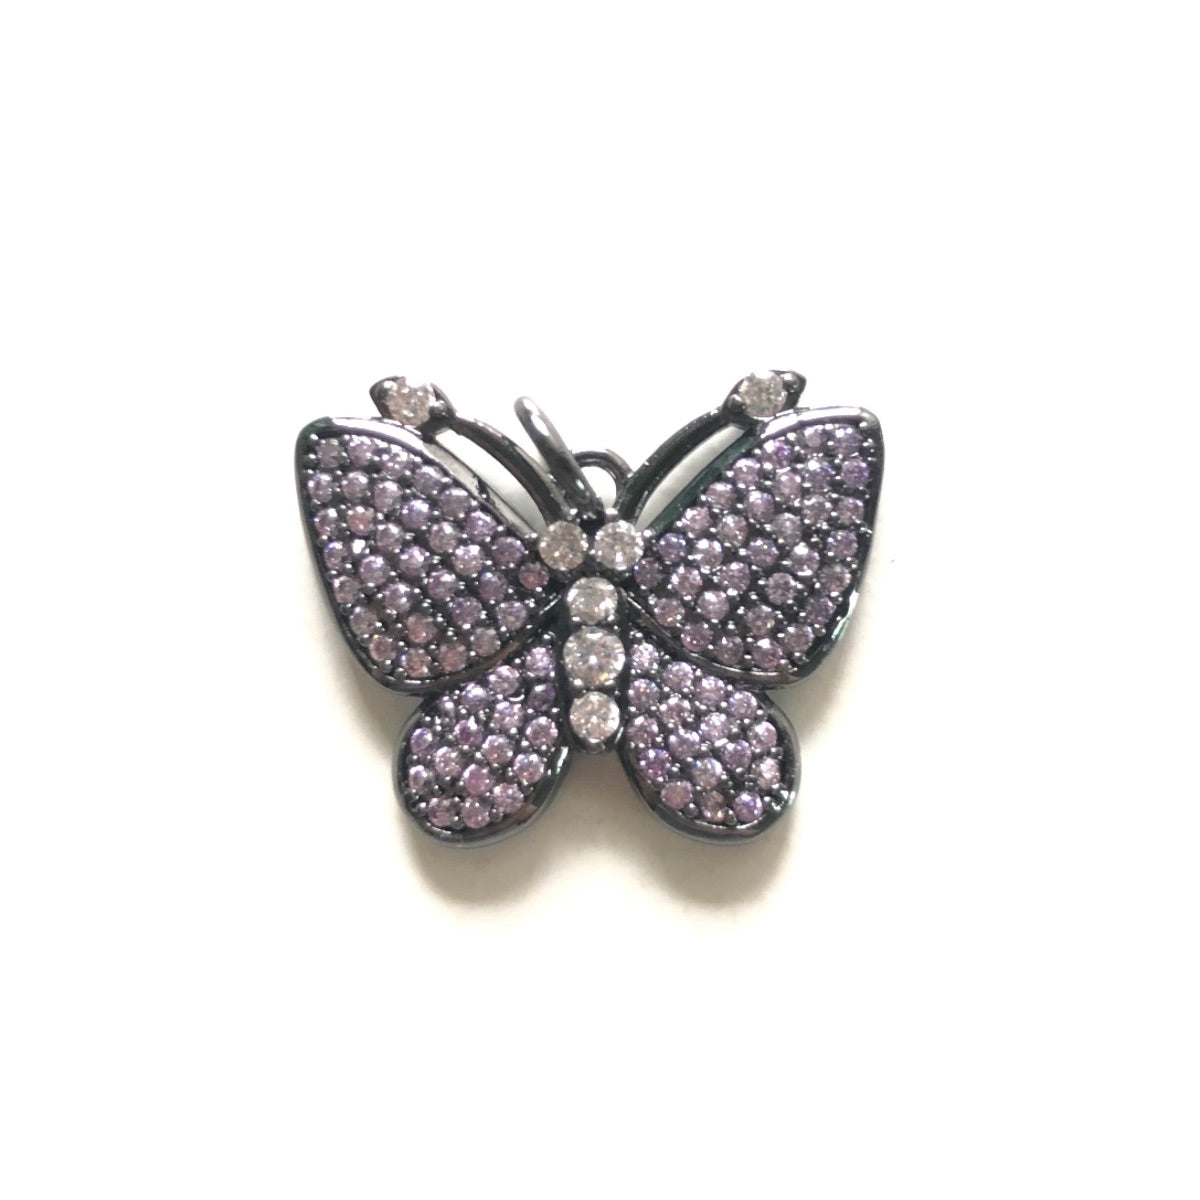 5pcs/lot 25*20mm Multicolor CZ Paved Butterfly Charms CZ Paved Charms Butterflies Colorful Zirconia New Charms Arrivals Charms Beads Beyond